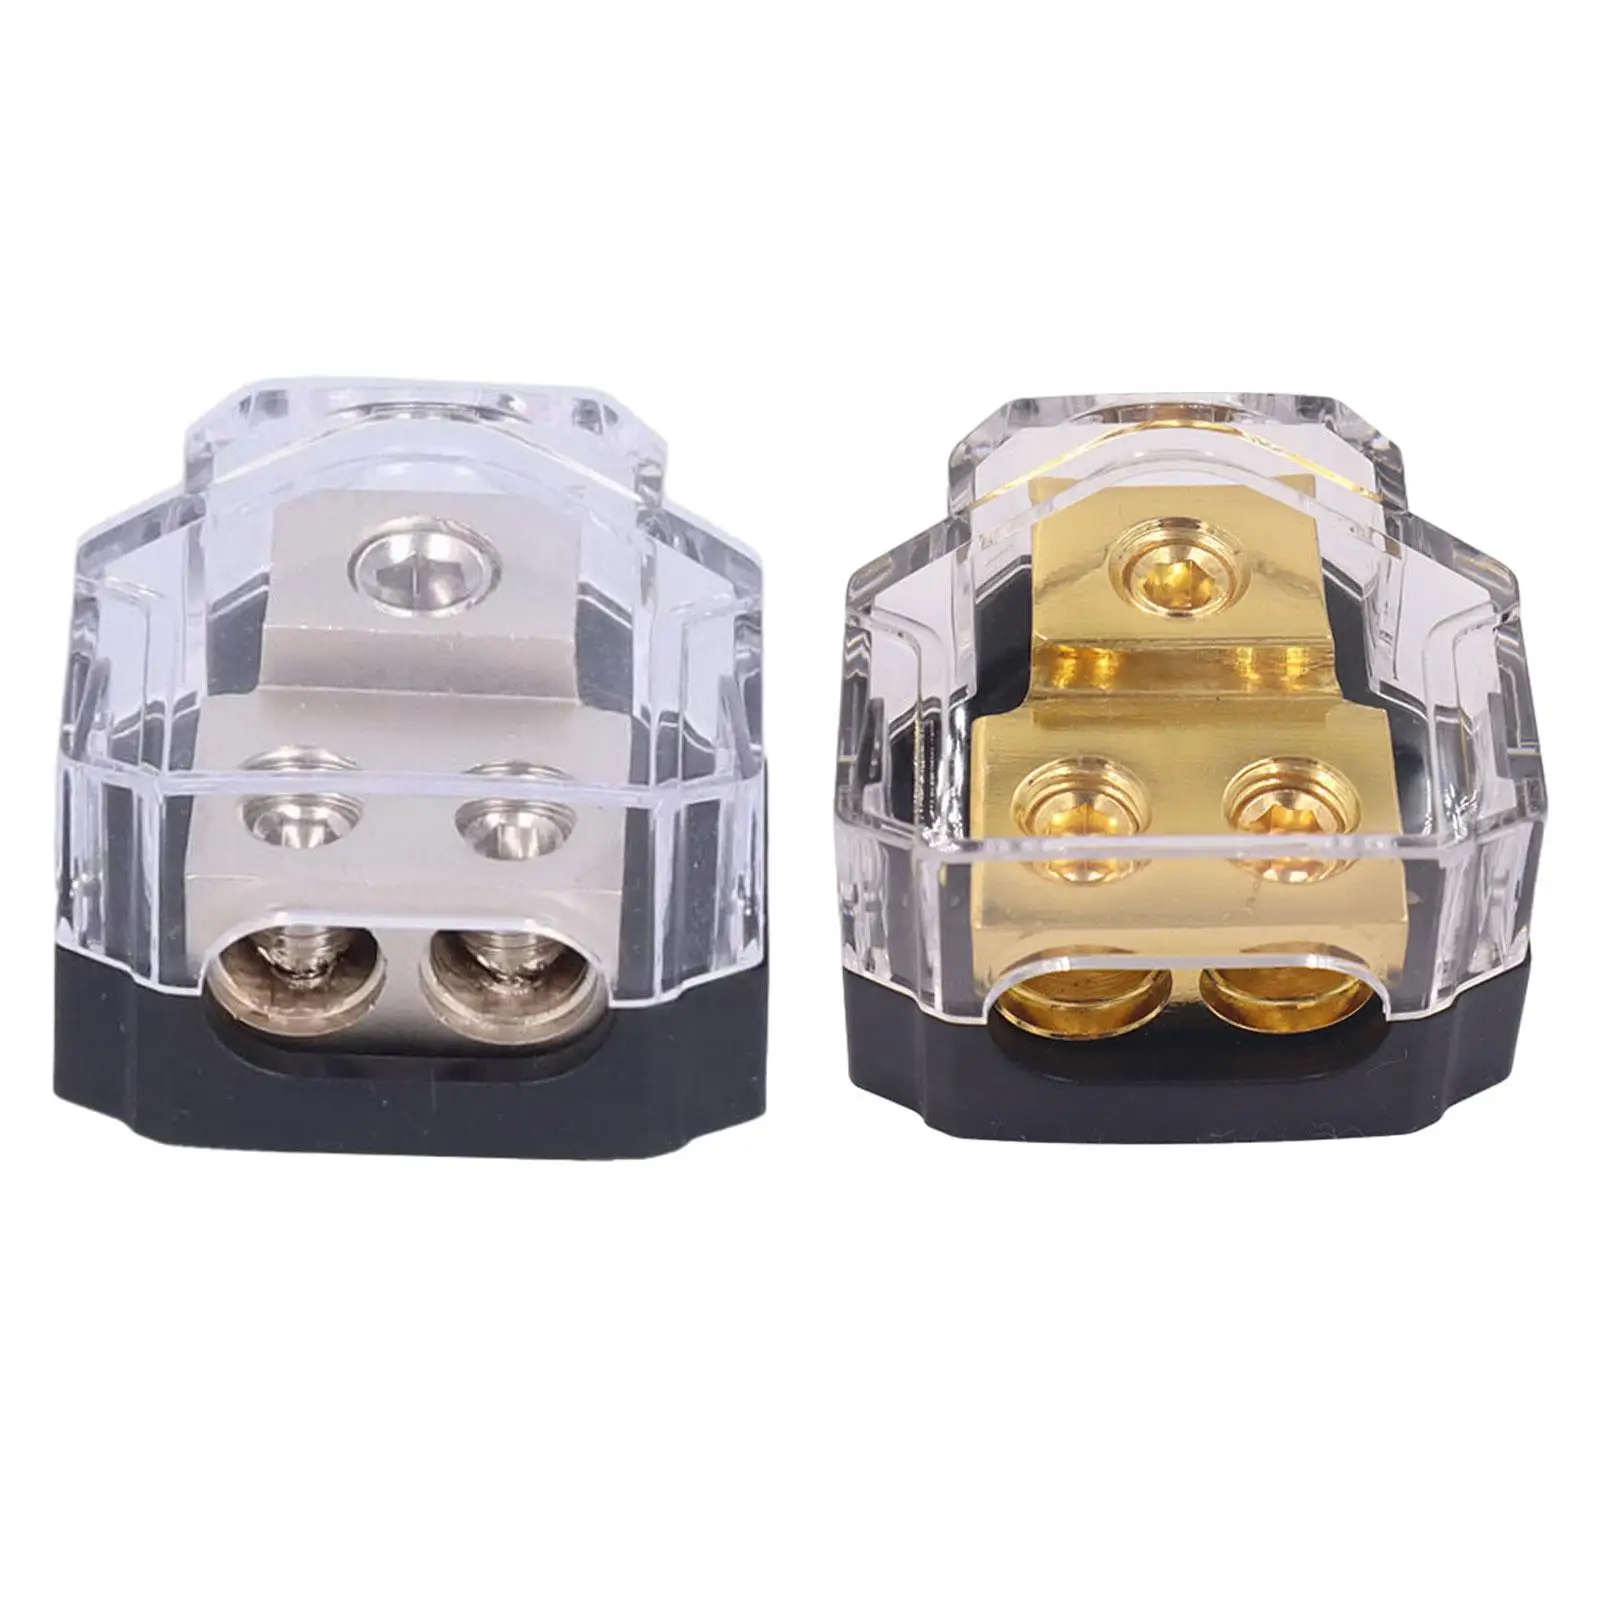 

2 Way Power Distribution Block for Car Audio Accessories Clear Cover Simple Installation Replace Parts Durable Connecting Block